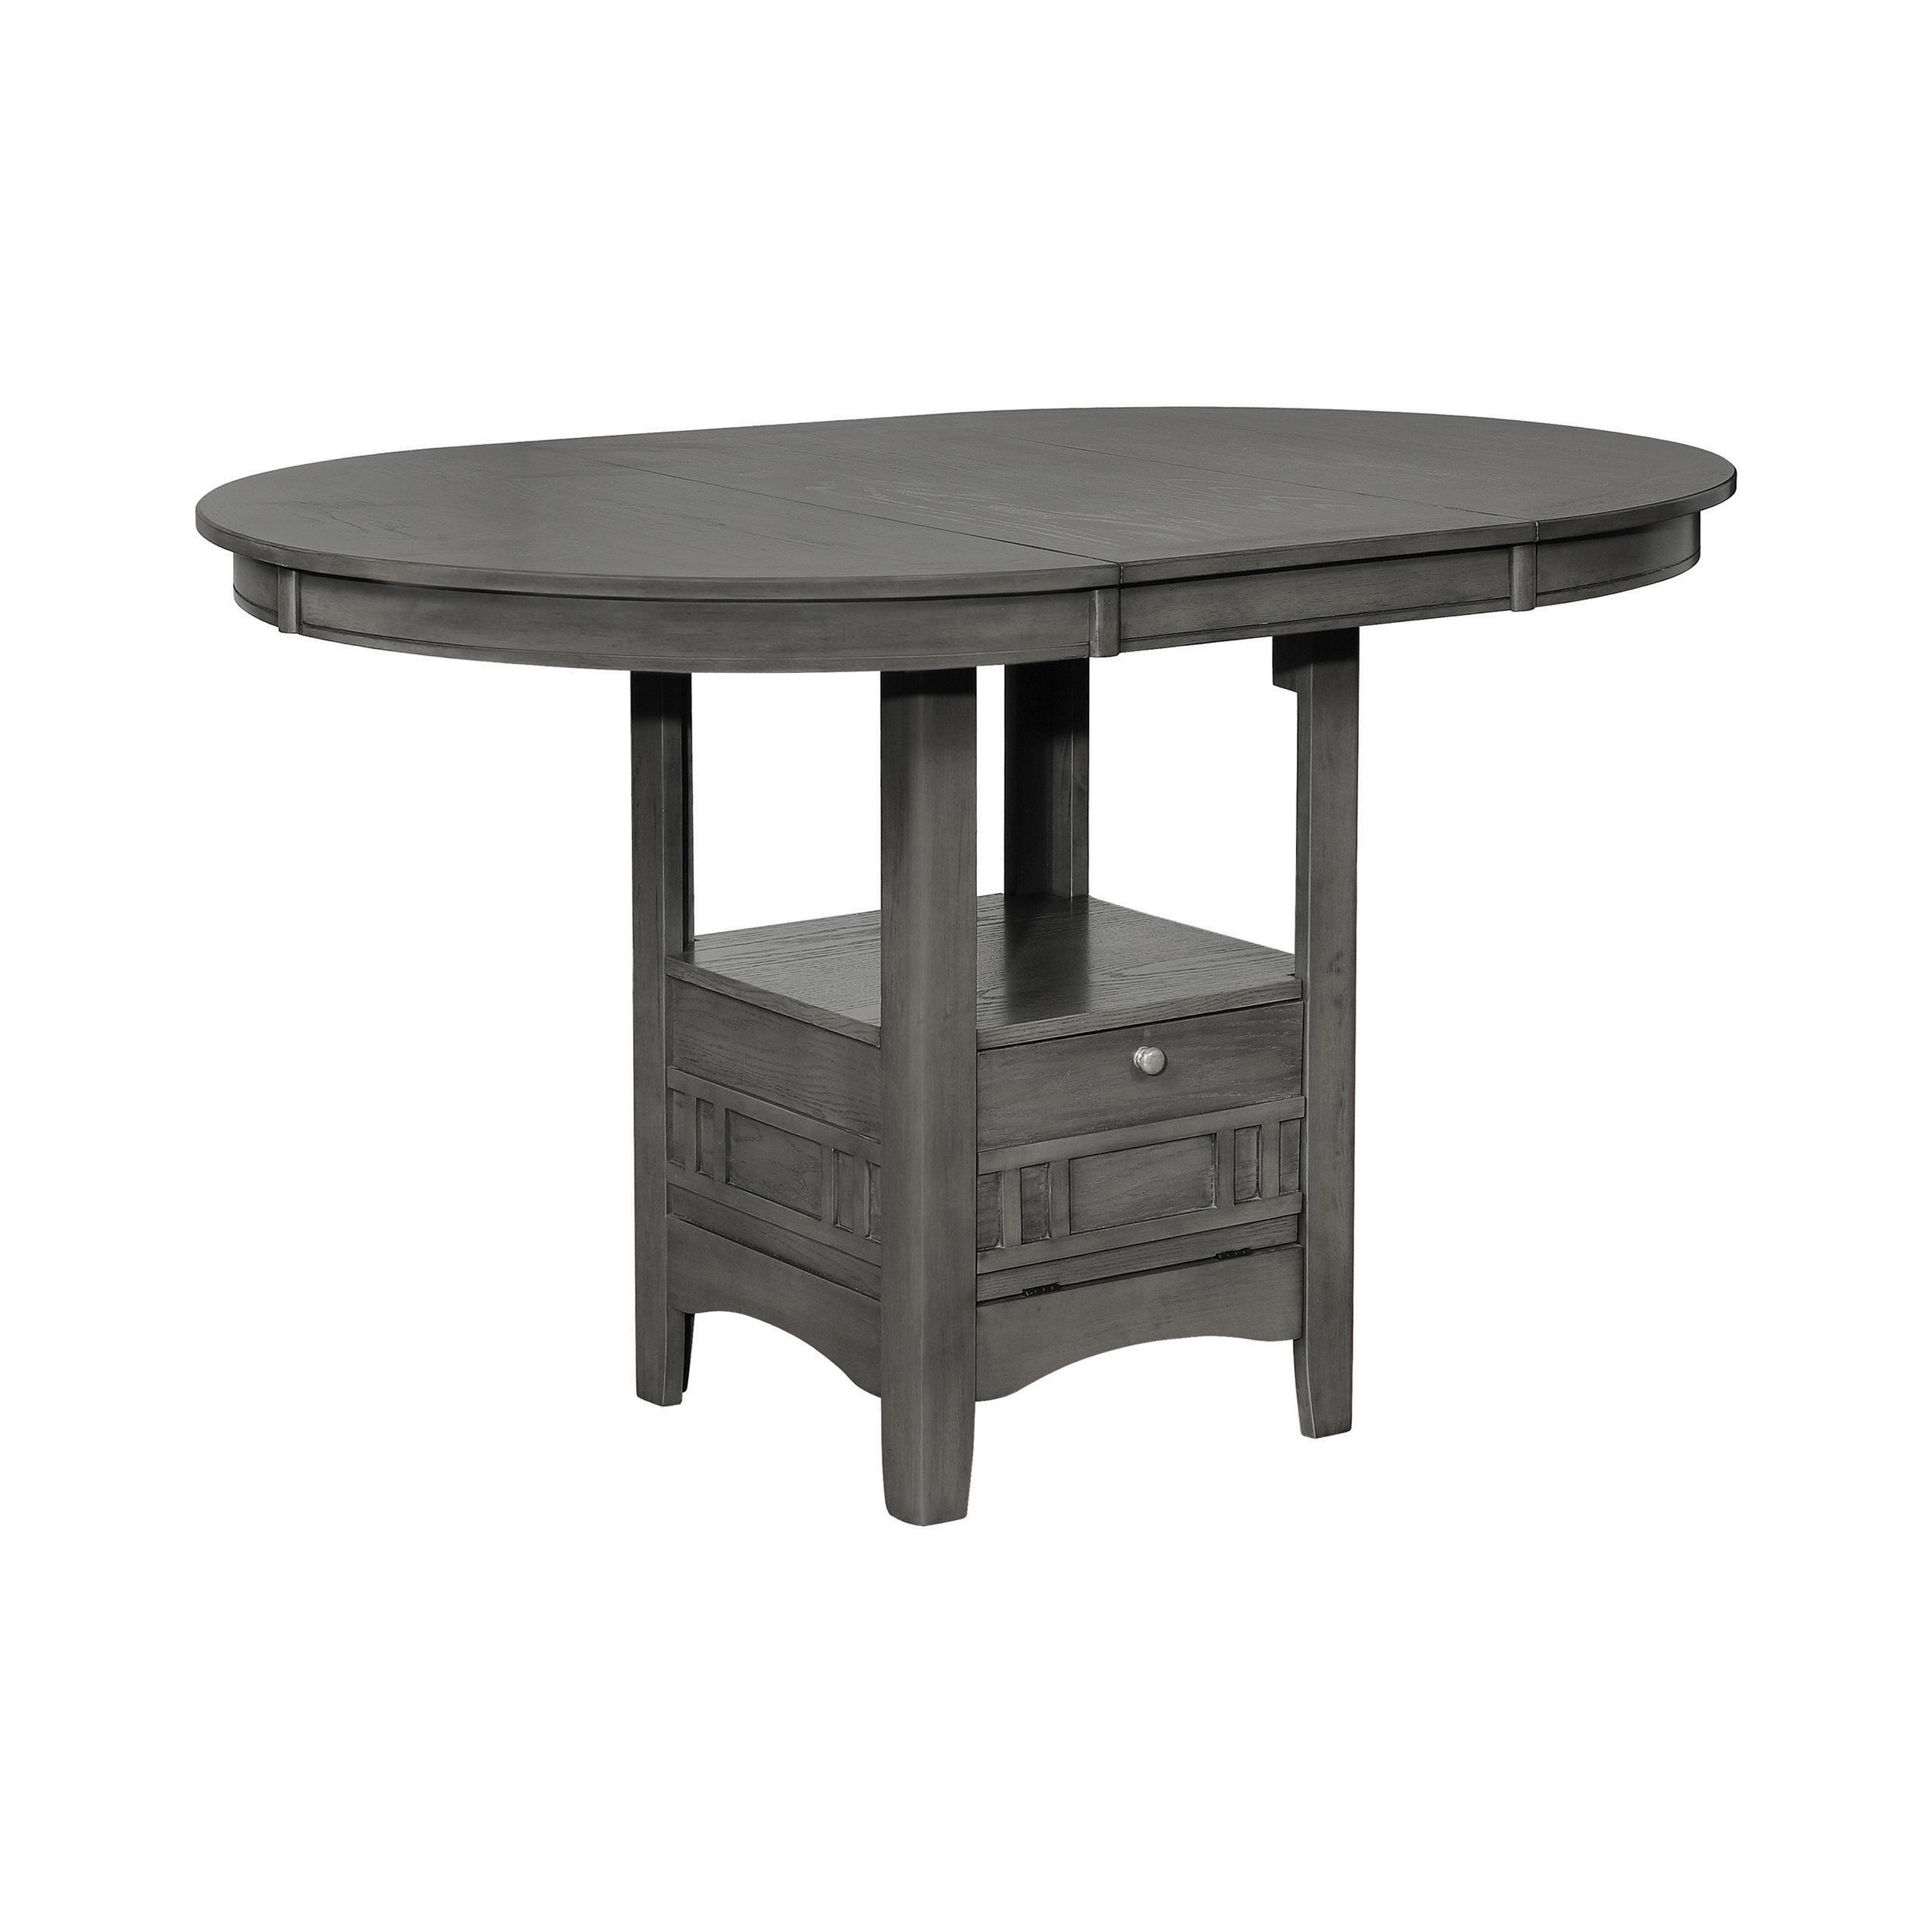 Transitional Counter Height Table 108218 Lavon 108218 in Gray 